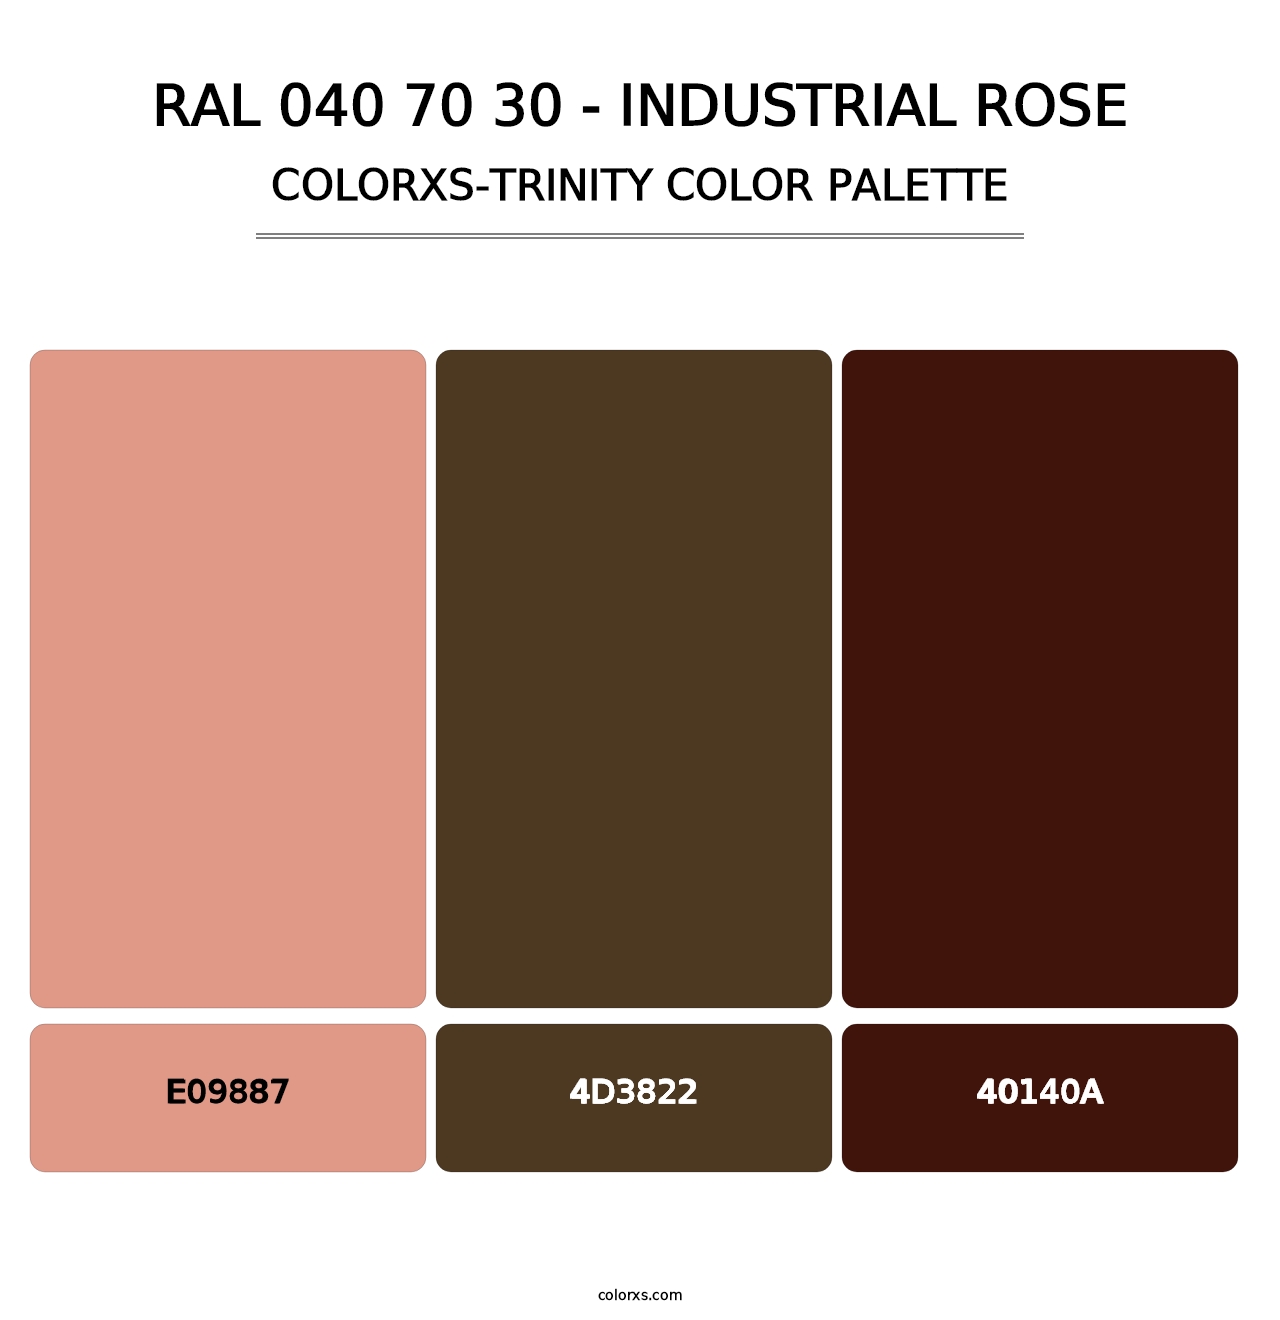 RAL 040 70 30 - Industrial Rose - Colorxs Trinity Palette